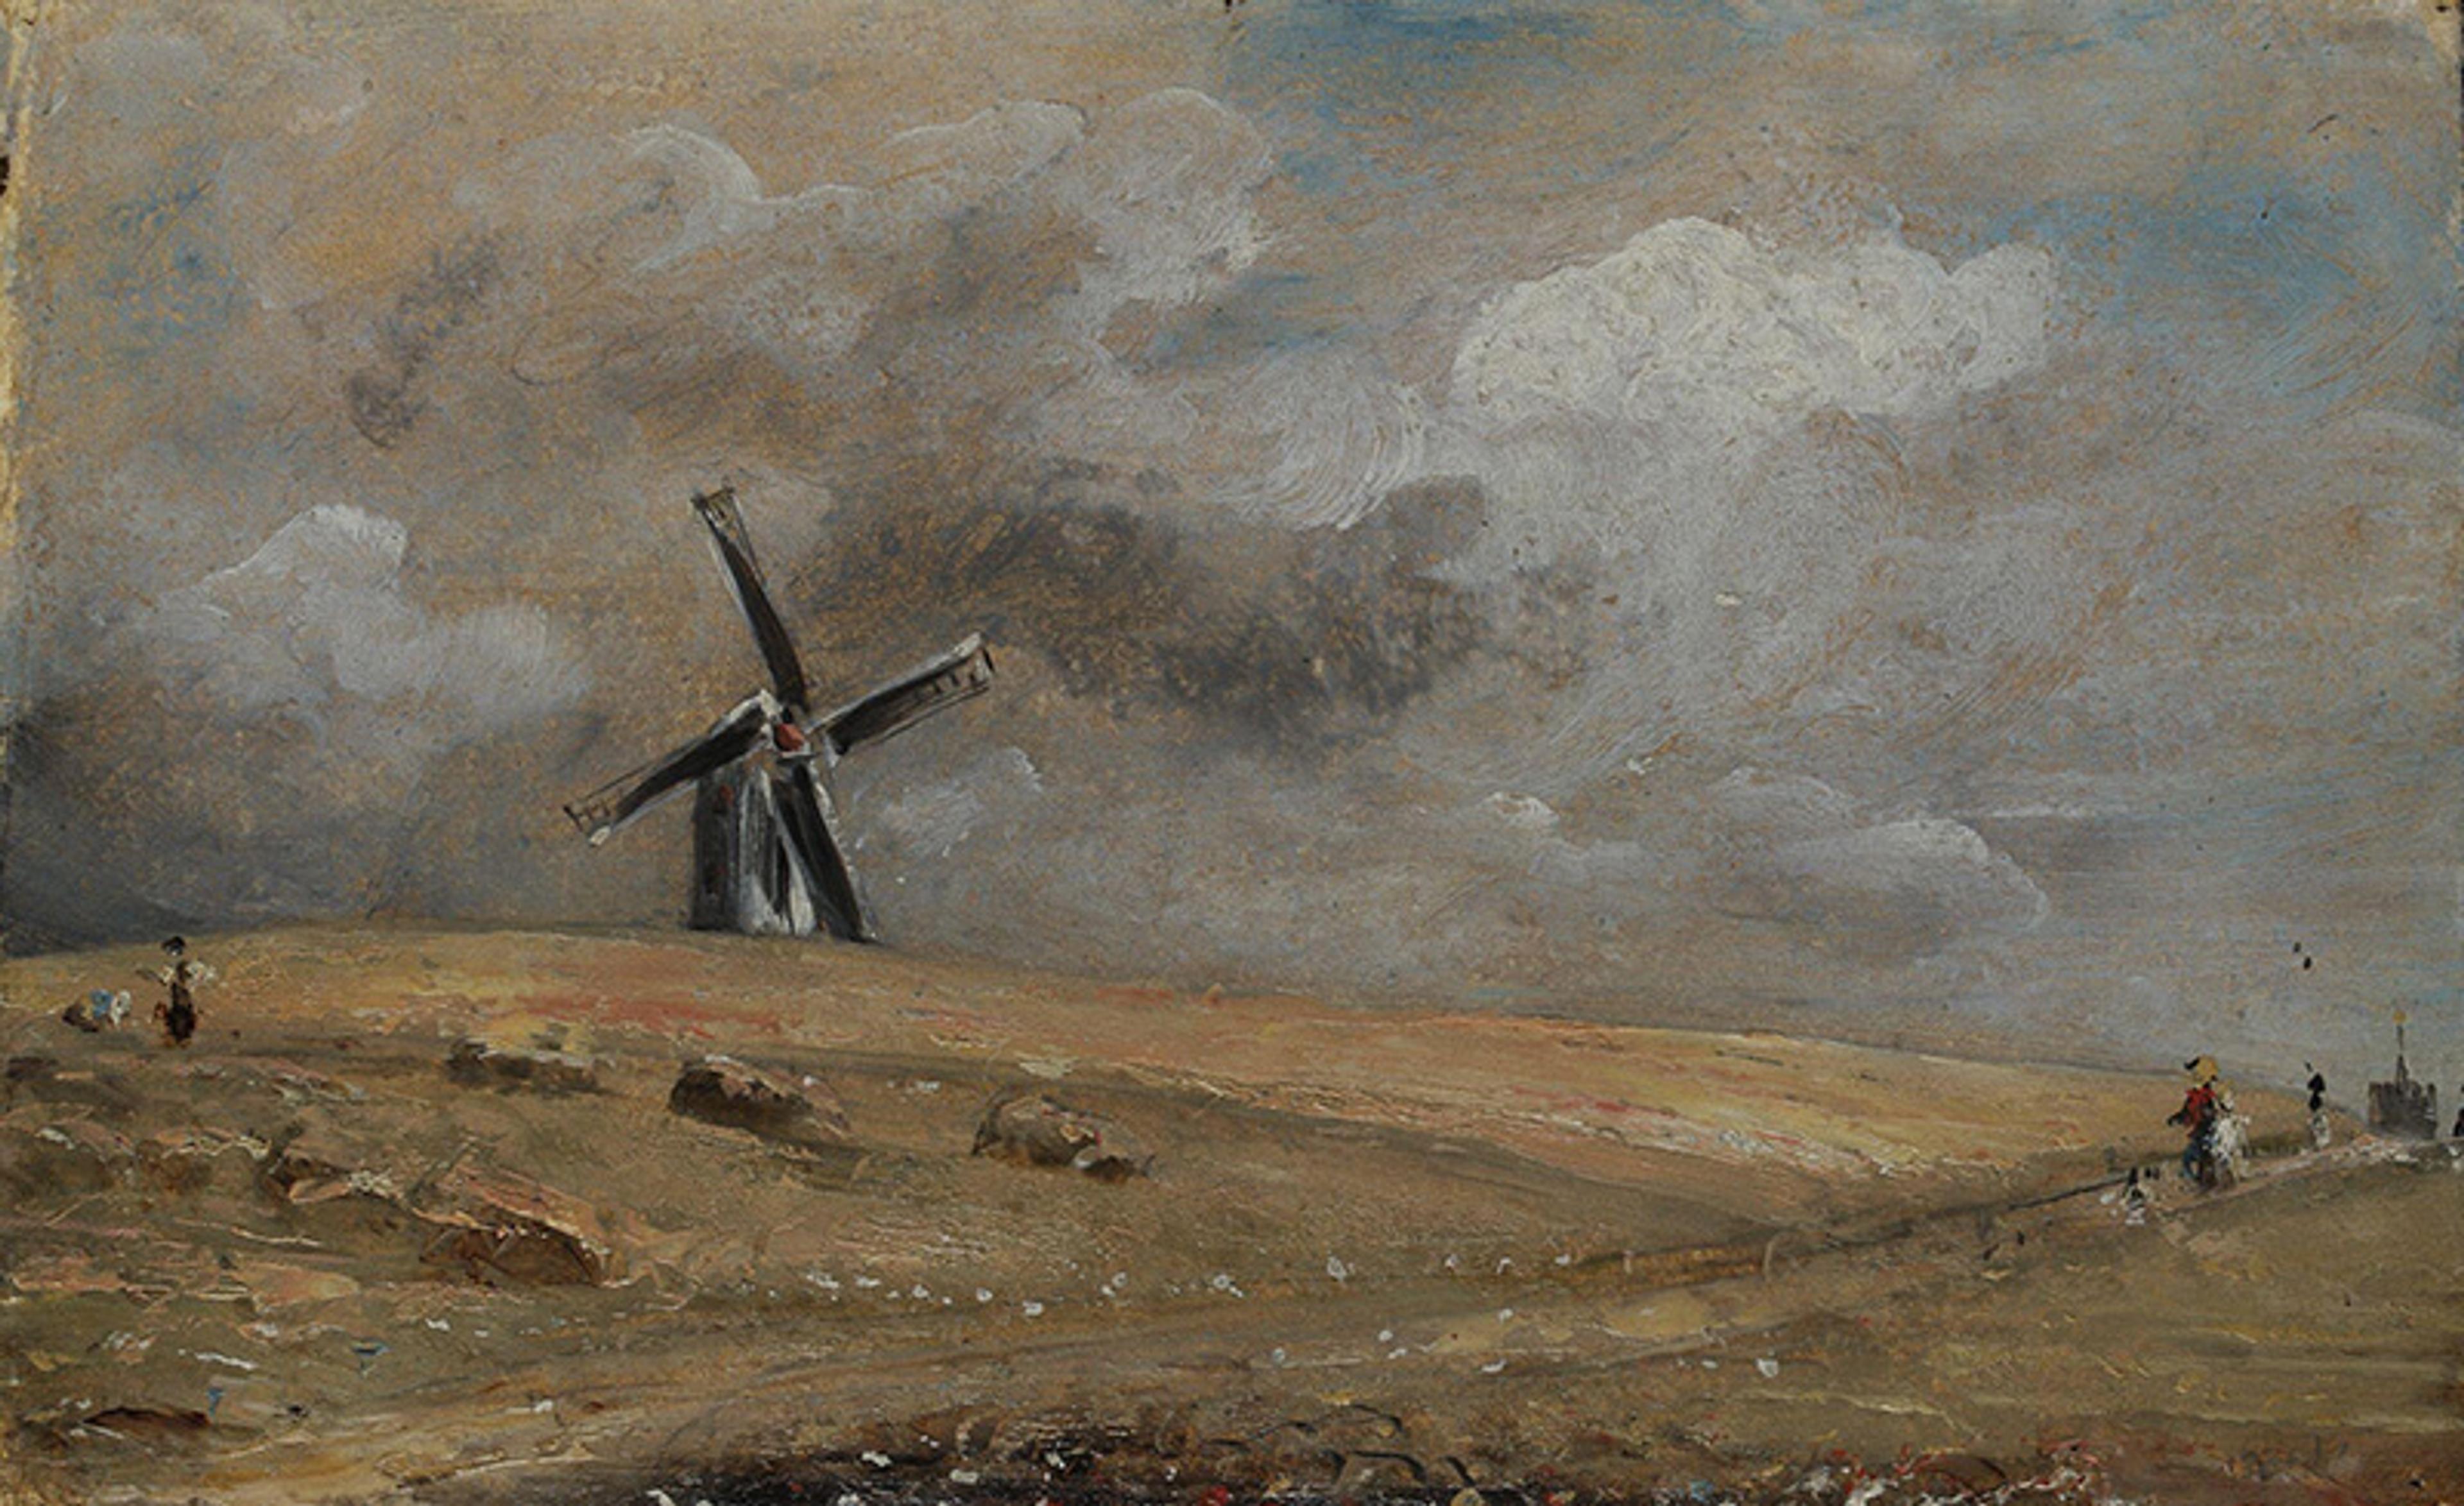 A painting of a windmill on a hill under a cloudy sky, with figures walking and horses in the background.